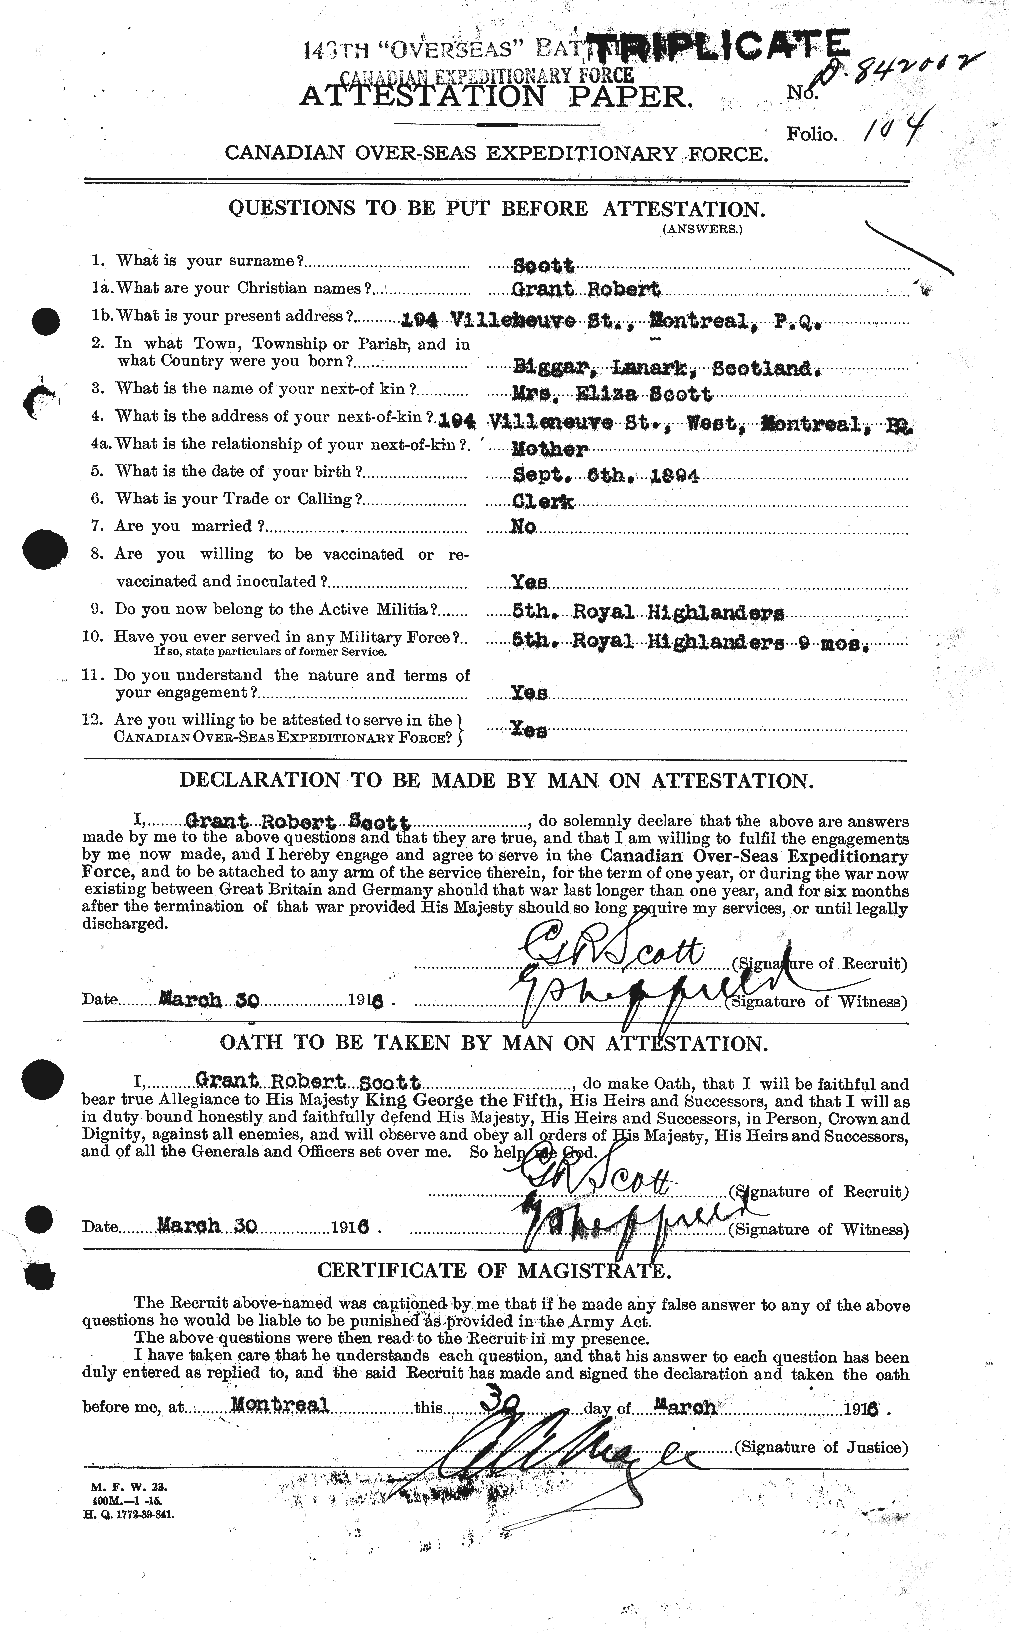 Personnel Records of the First World War - CEF 086510a